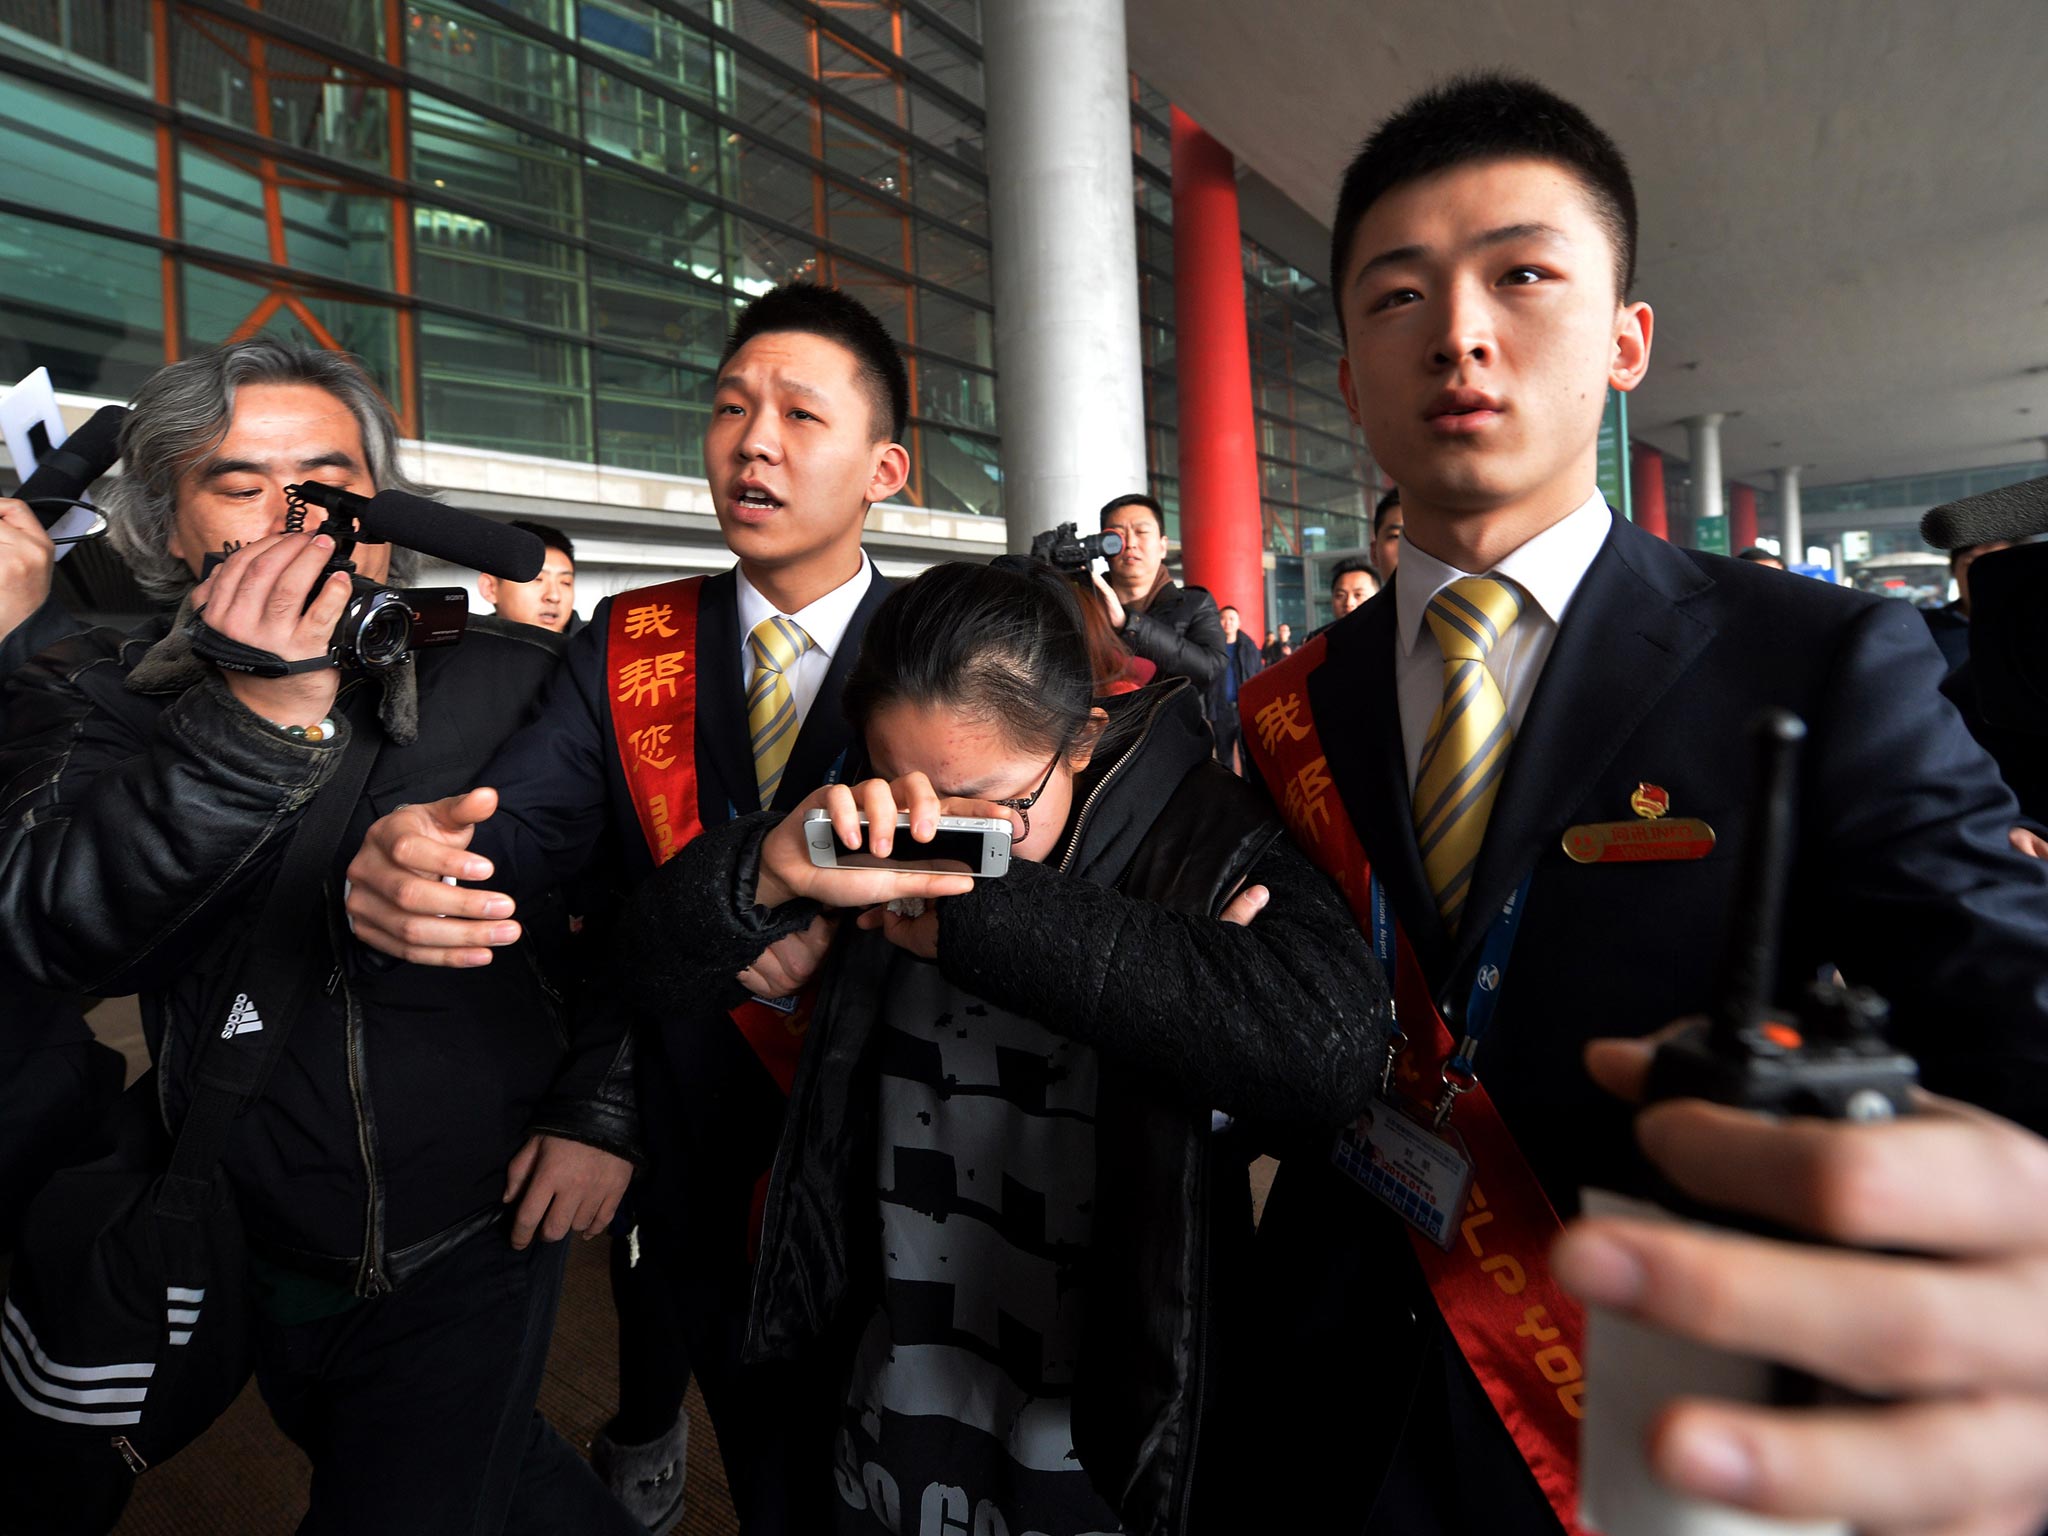 A crying woman is escorted to a bus for relatives at the Beijing Airport after news of the missing Malaysia Airlines Boeing 777-200 plane